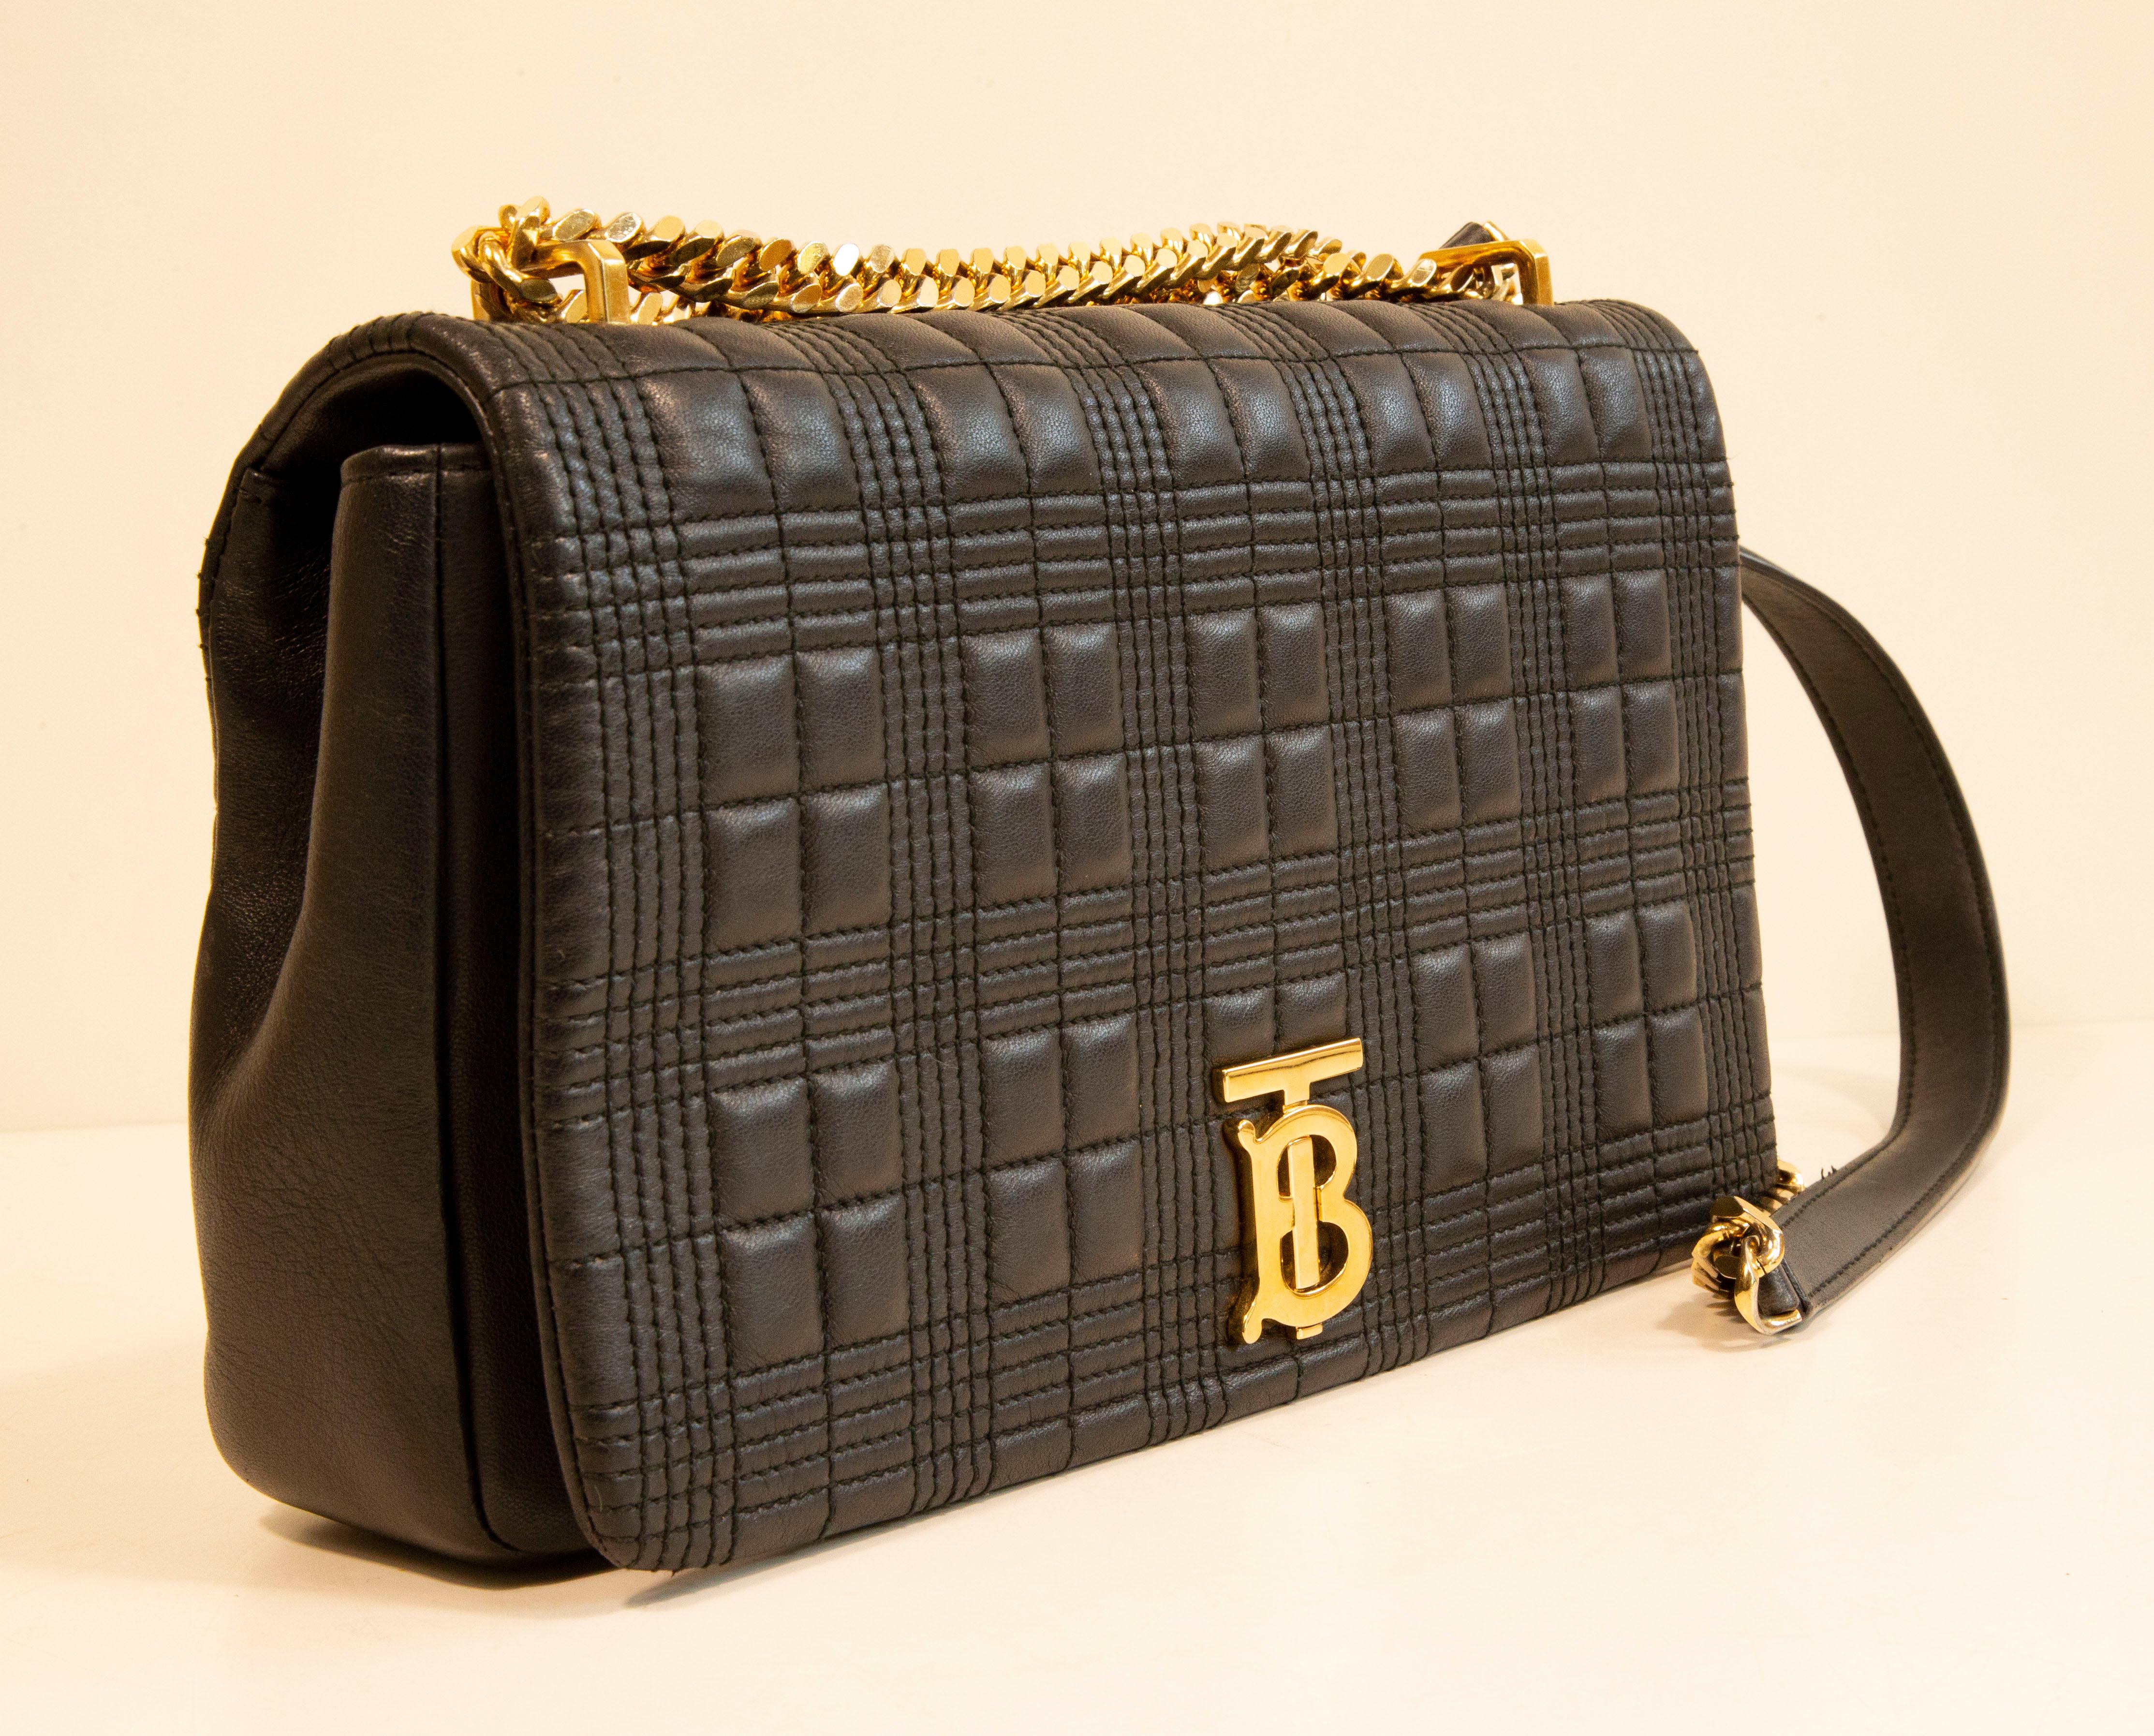 A Burberry medium Lola bag made of black quilted leather with gold toned hardware. The interior is lined with black fabric and next to the major compartment it features, one side pocket with a zipper. The bag can be worn as a cross body bag or as a